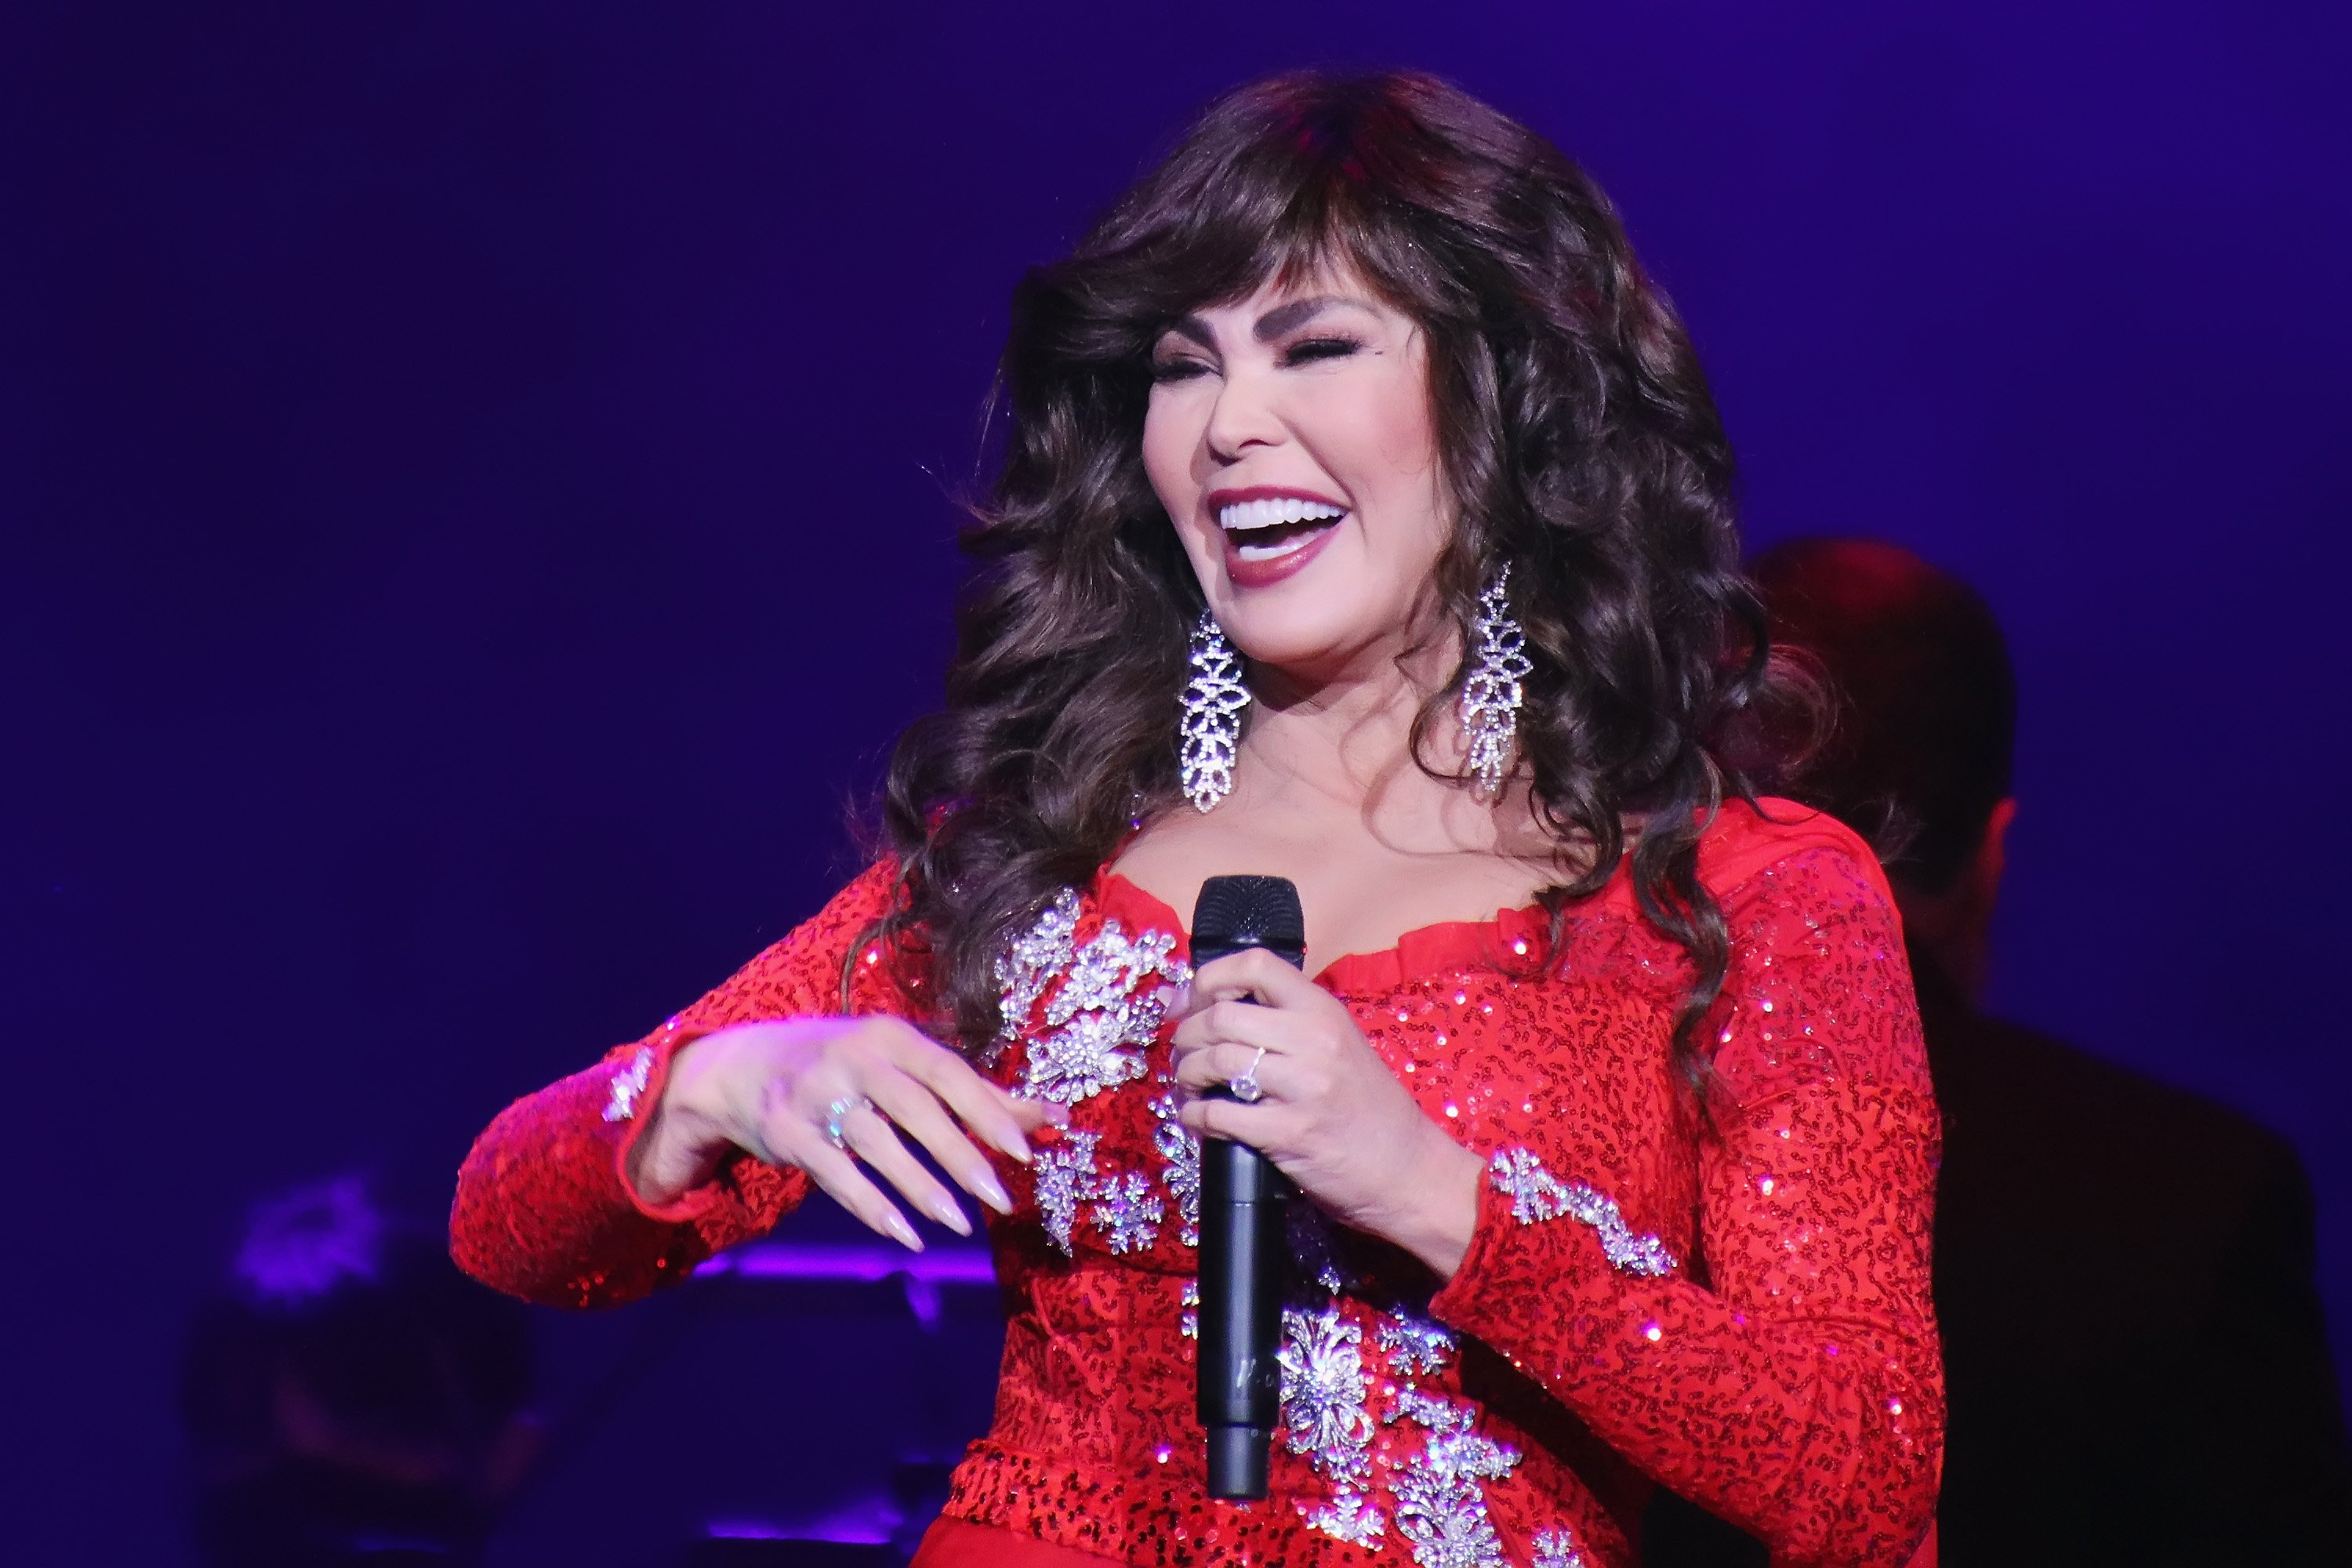 Marie Osmond performs in her concert "A Symphonic Christmas" at the Etess Arena on December 10, 2021, in Atlantic City, New Jersey | Source: Getty Images